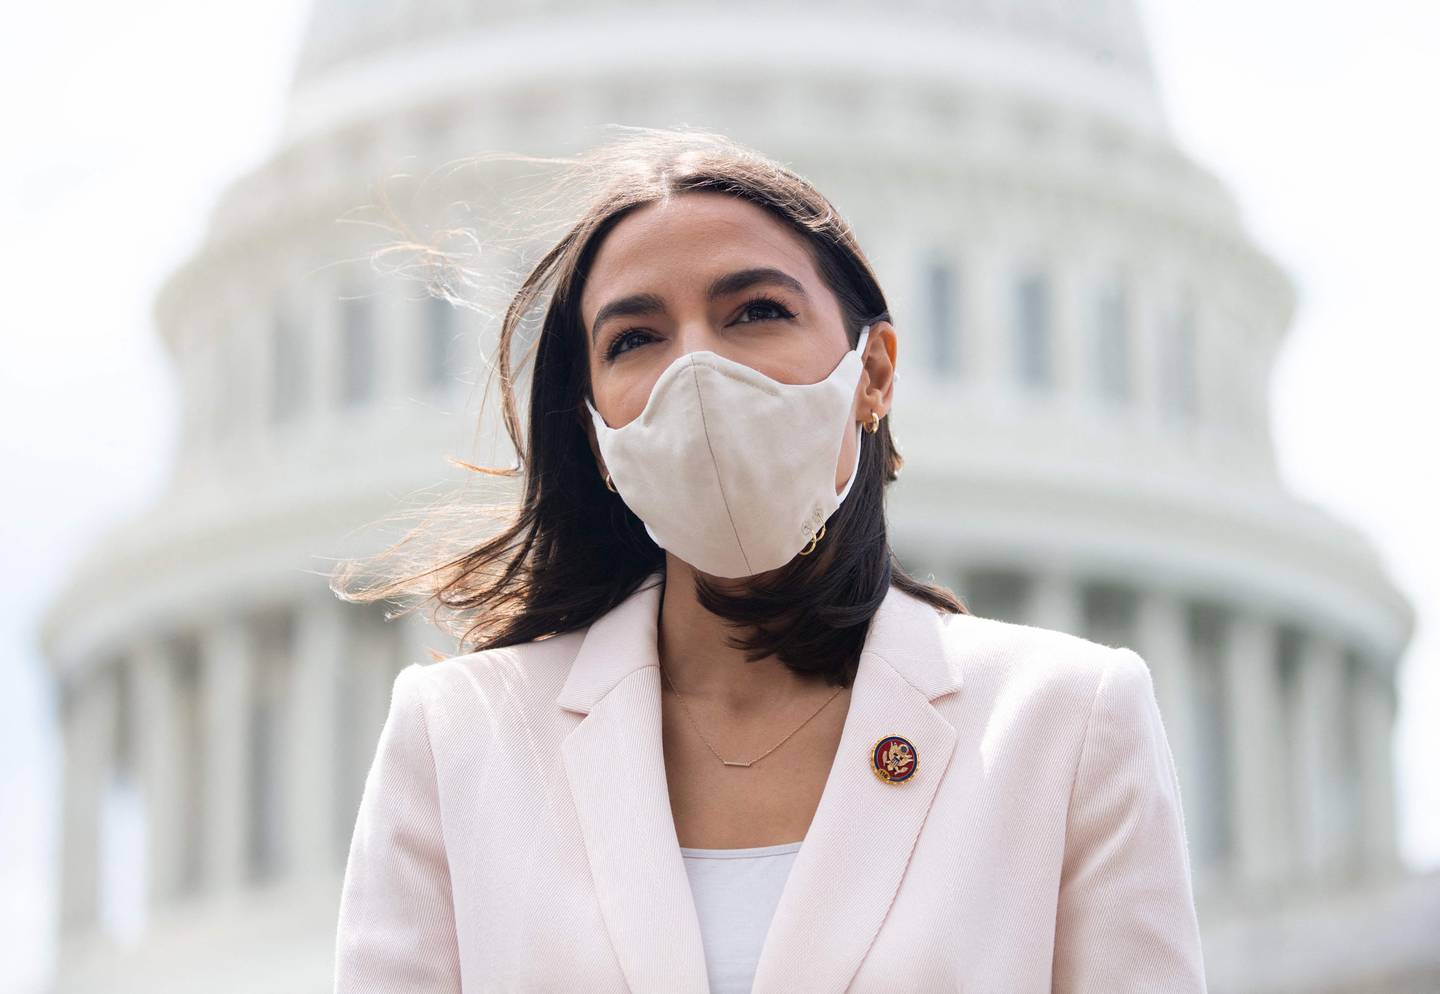 Representative Alexandria Ocasio-Cortez tested positive for Covid-19 in early January 2022. AFP